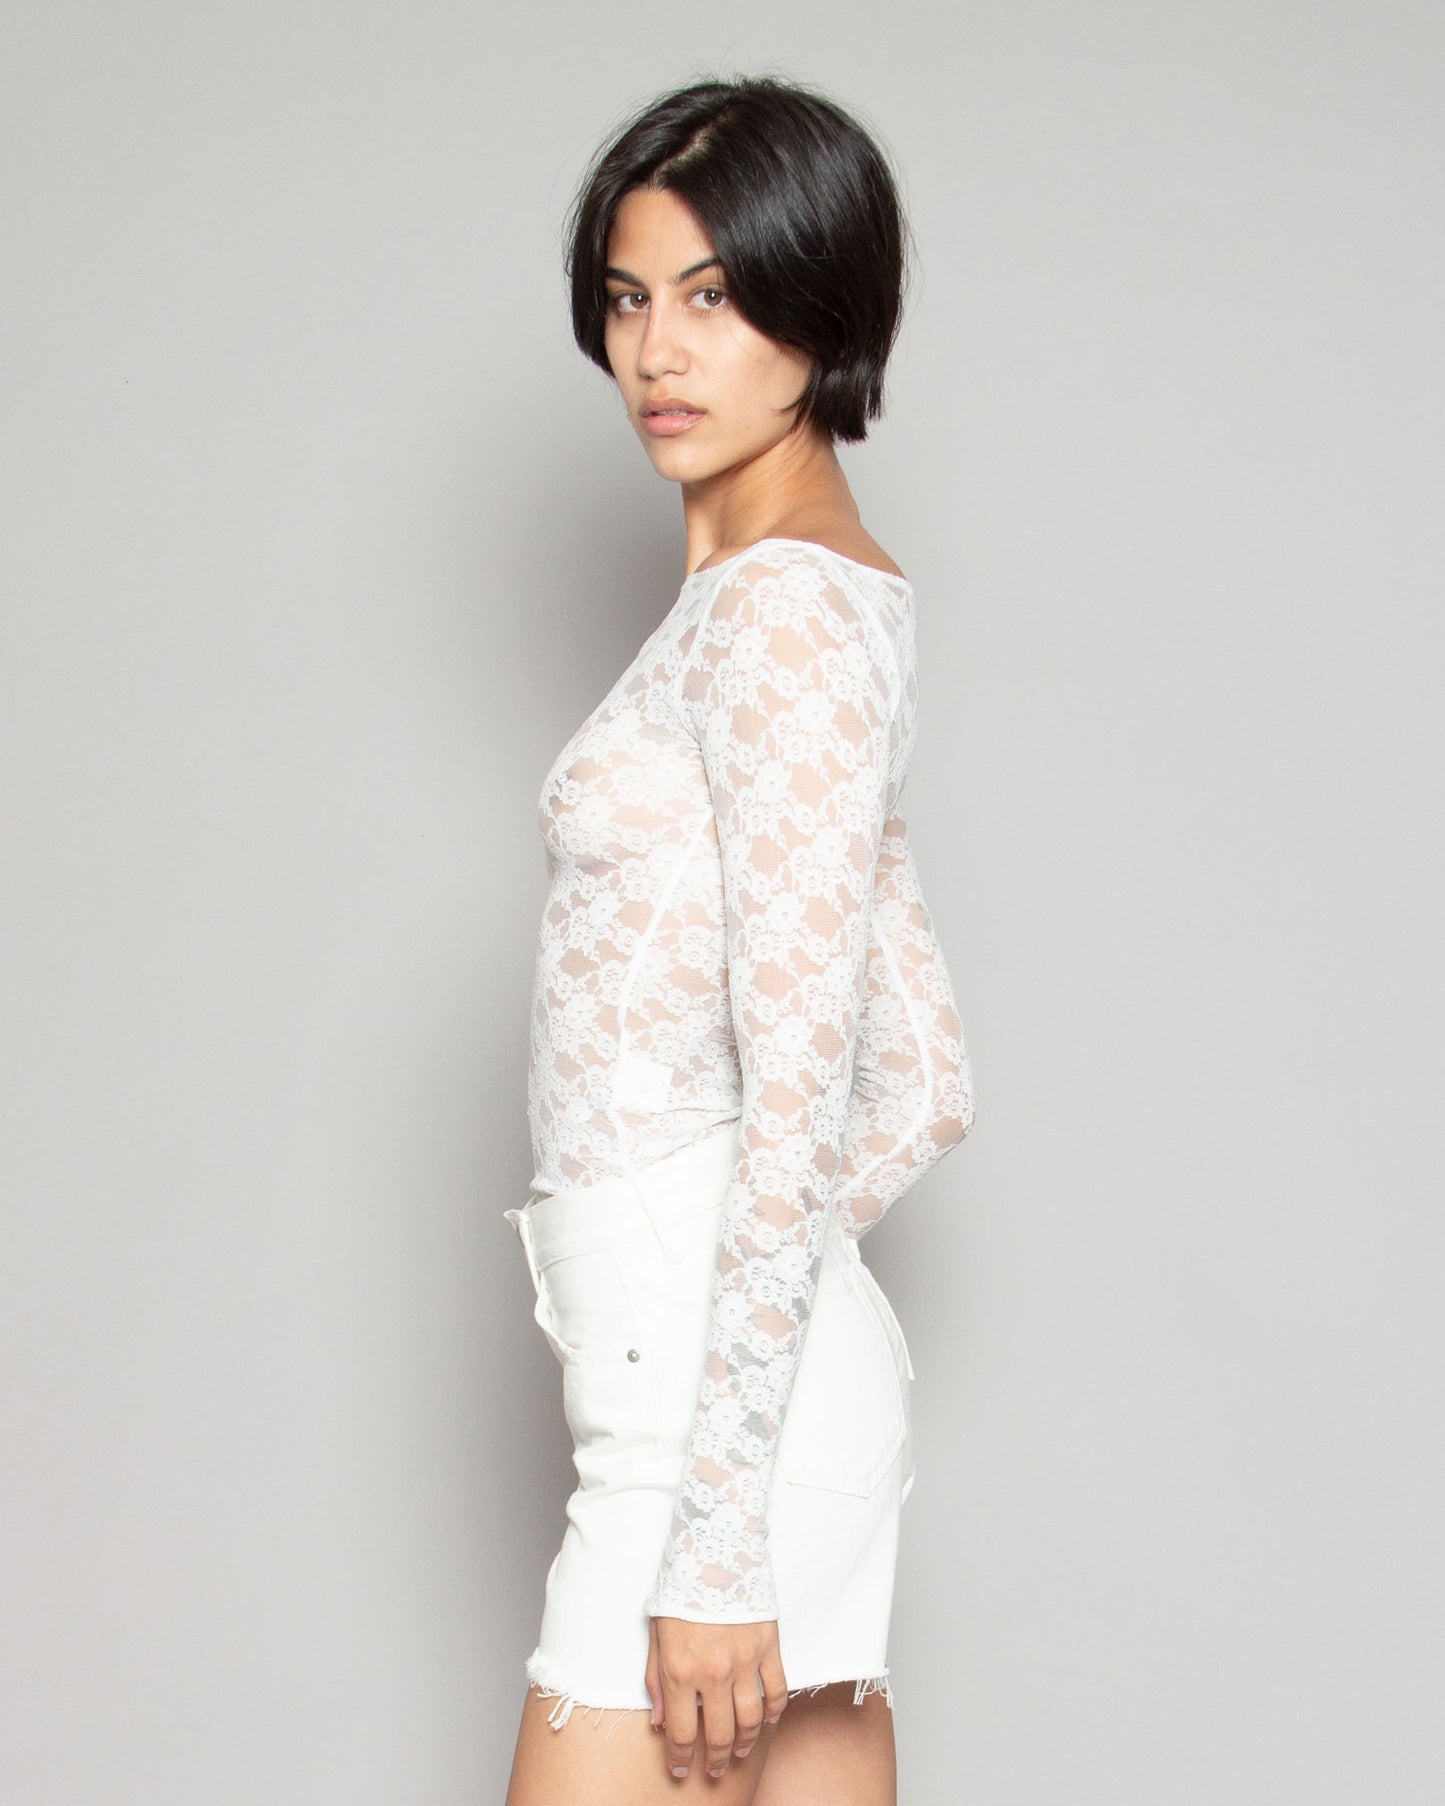 HEATHER STANKO Lace Long Sleeve Top in Purity available at Lahn.shop